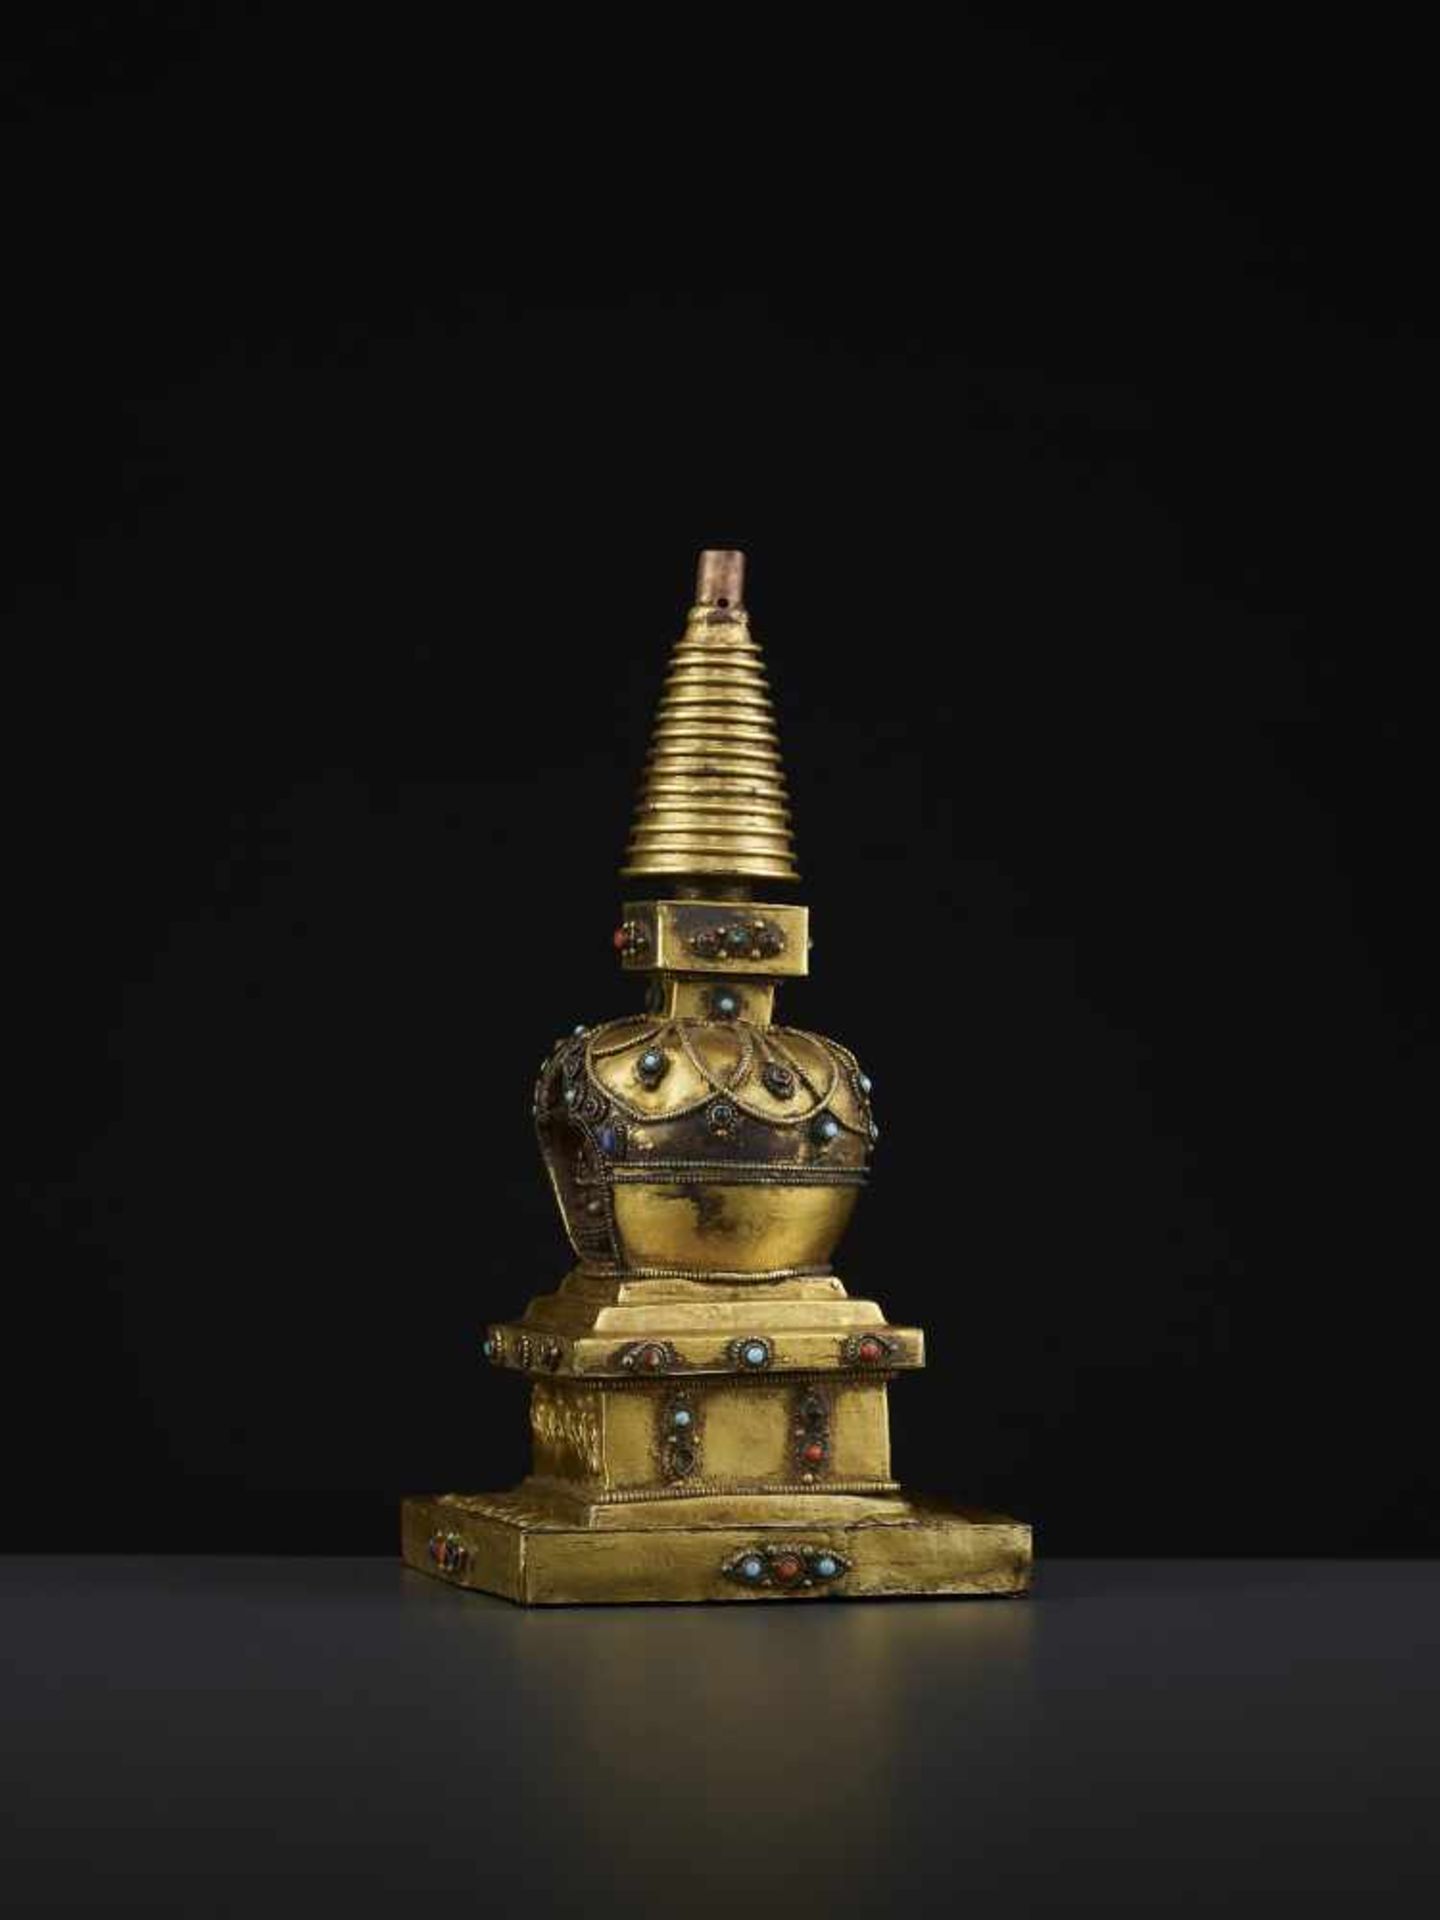 A REPOUSSE STUPA 18TH CENTURYTibet, 18TH to earlier 19TH century. A fire-gilt copper model of a - Image 4 of 11